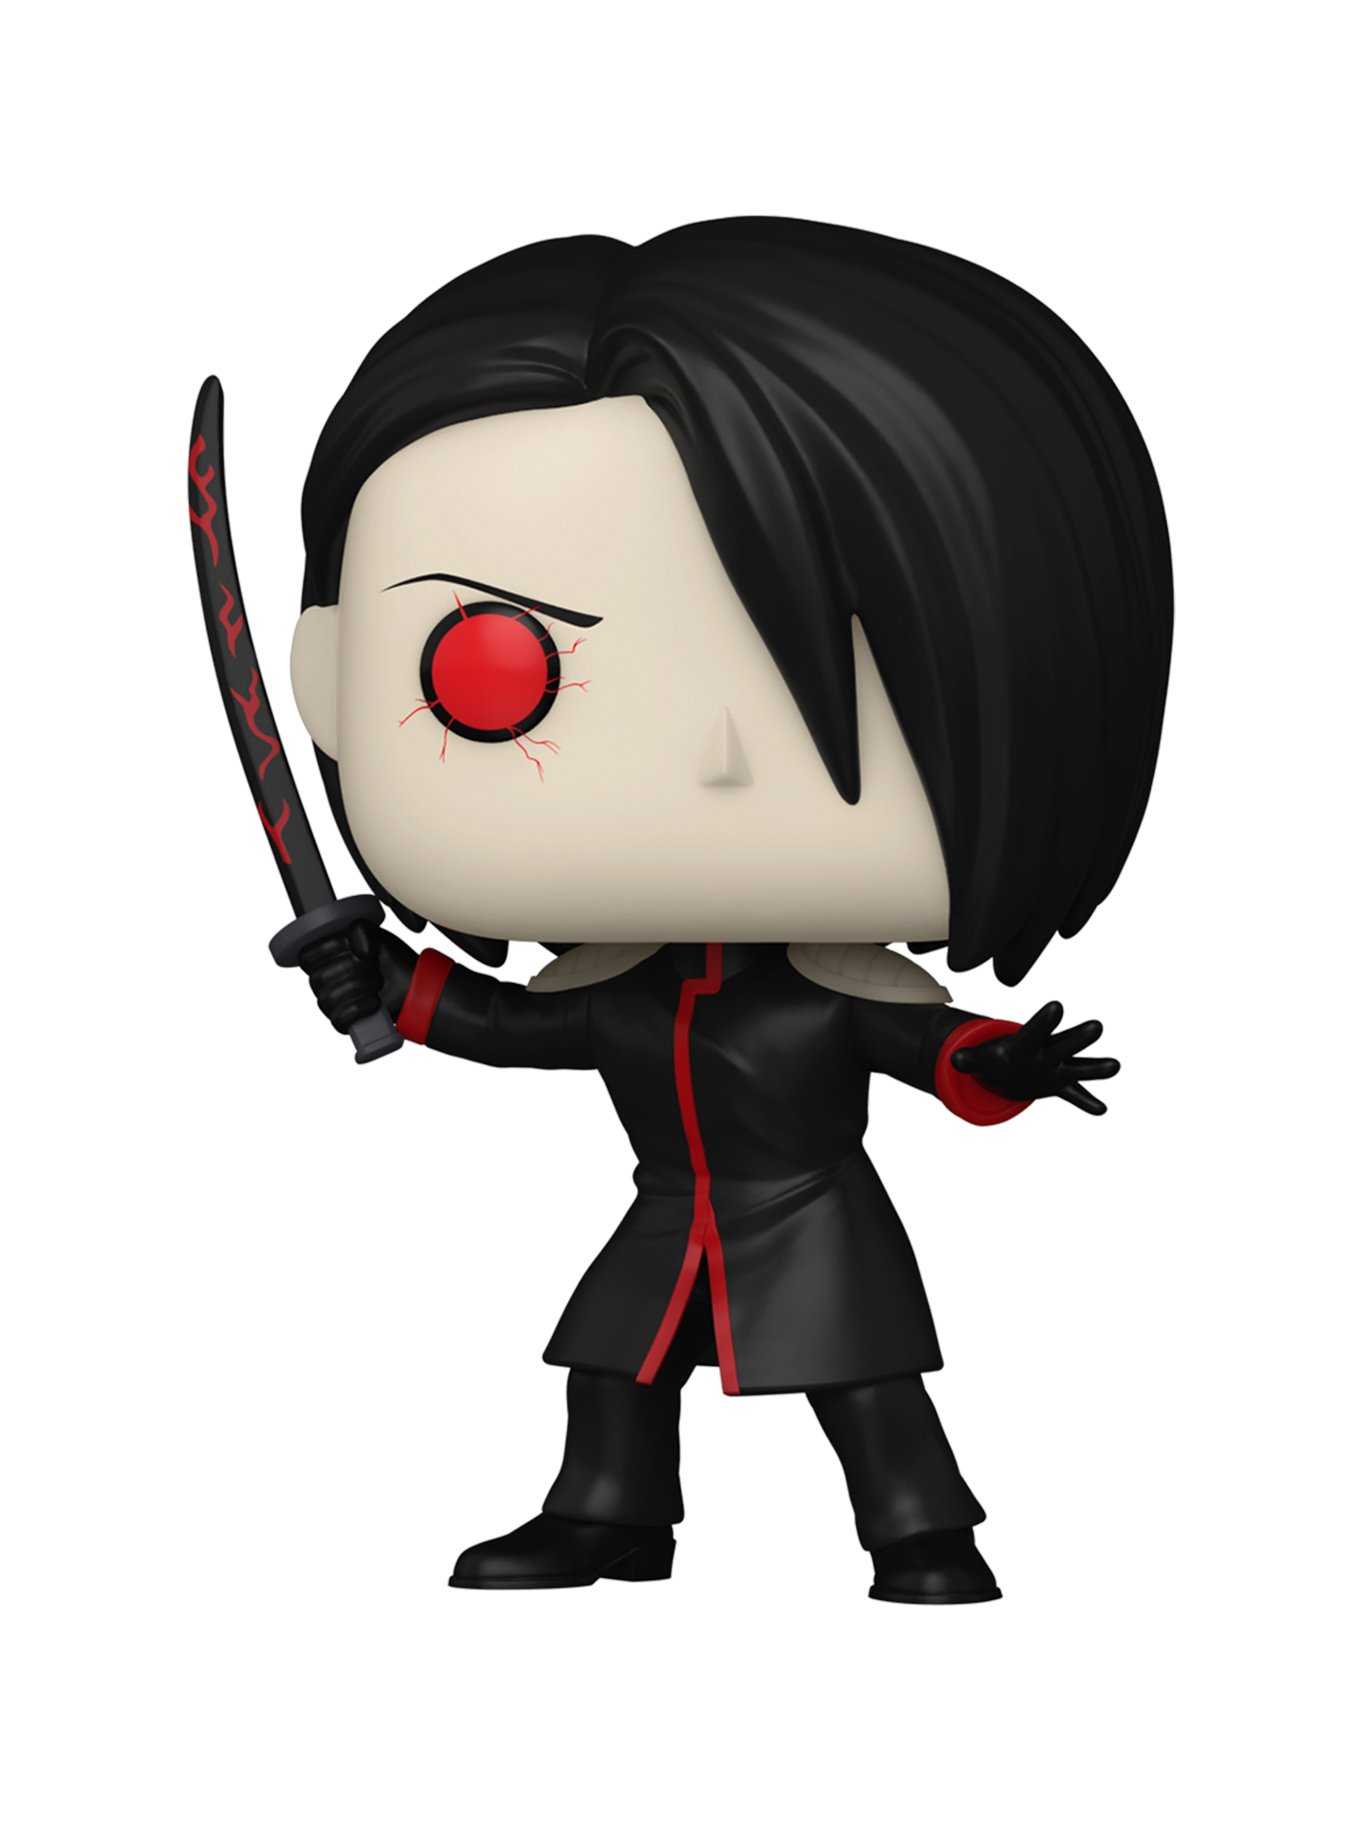 Tokyo Ghoul Funko Pops! Check out our online inventory! Over 50 funko pops  !